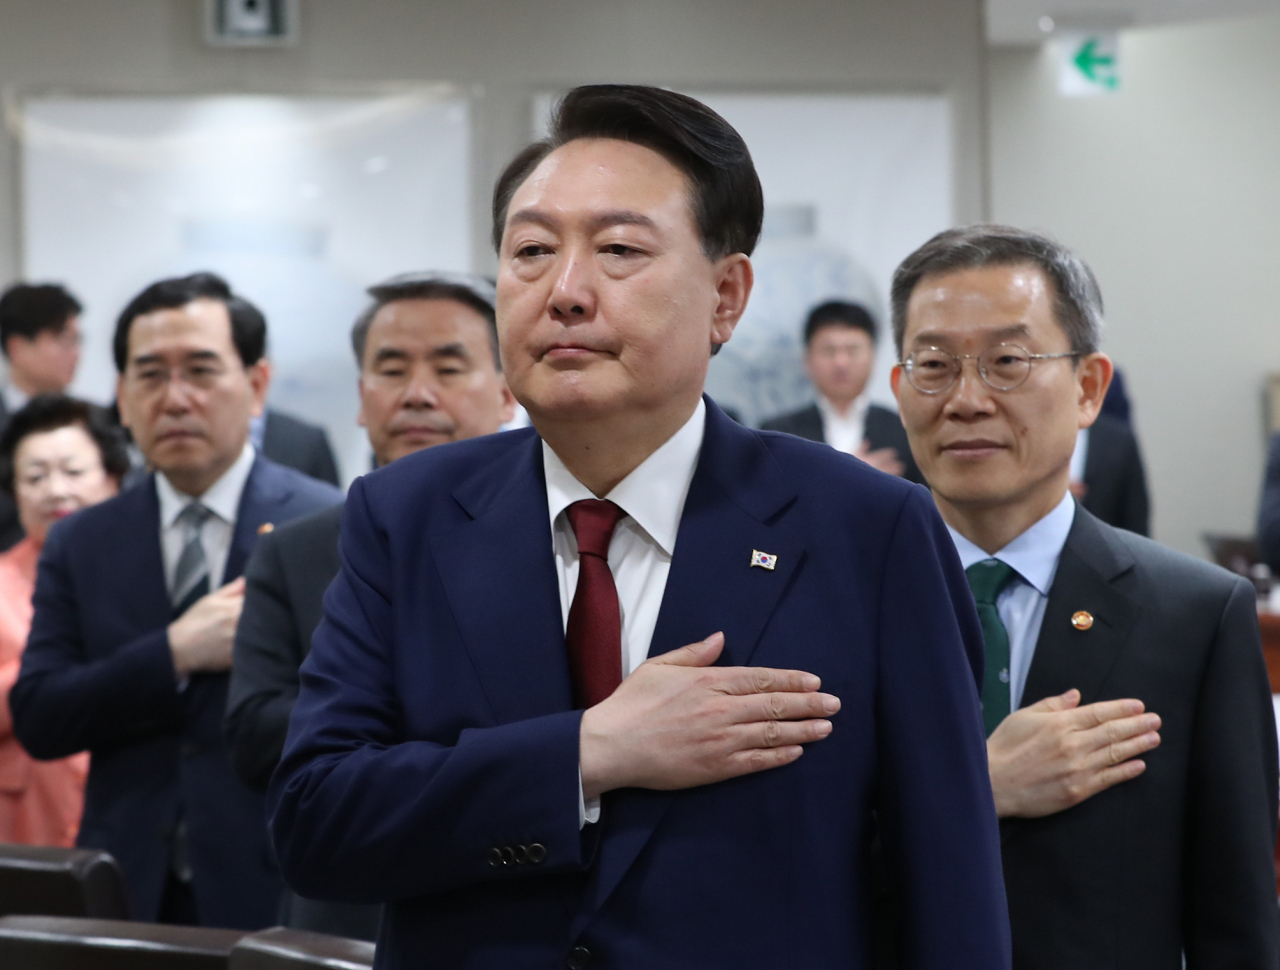 President Yoon Suk Yeol salutes the national flag at a Cabinet meeting held at the presidential office building in Yongsan-gu, Seoul on Tuesday. (Yonhap)